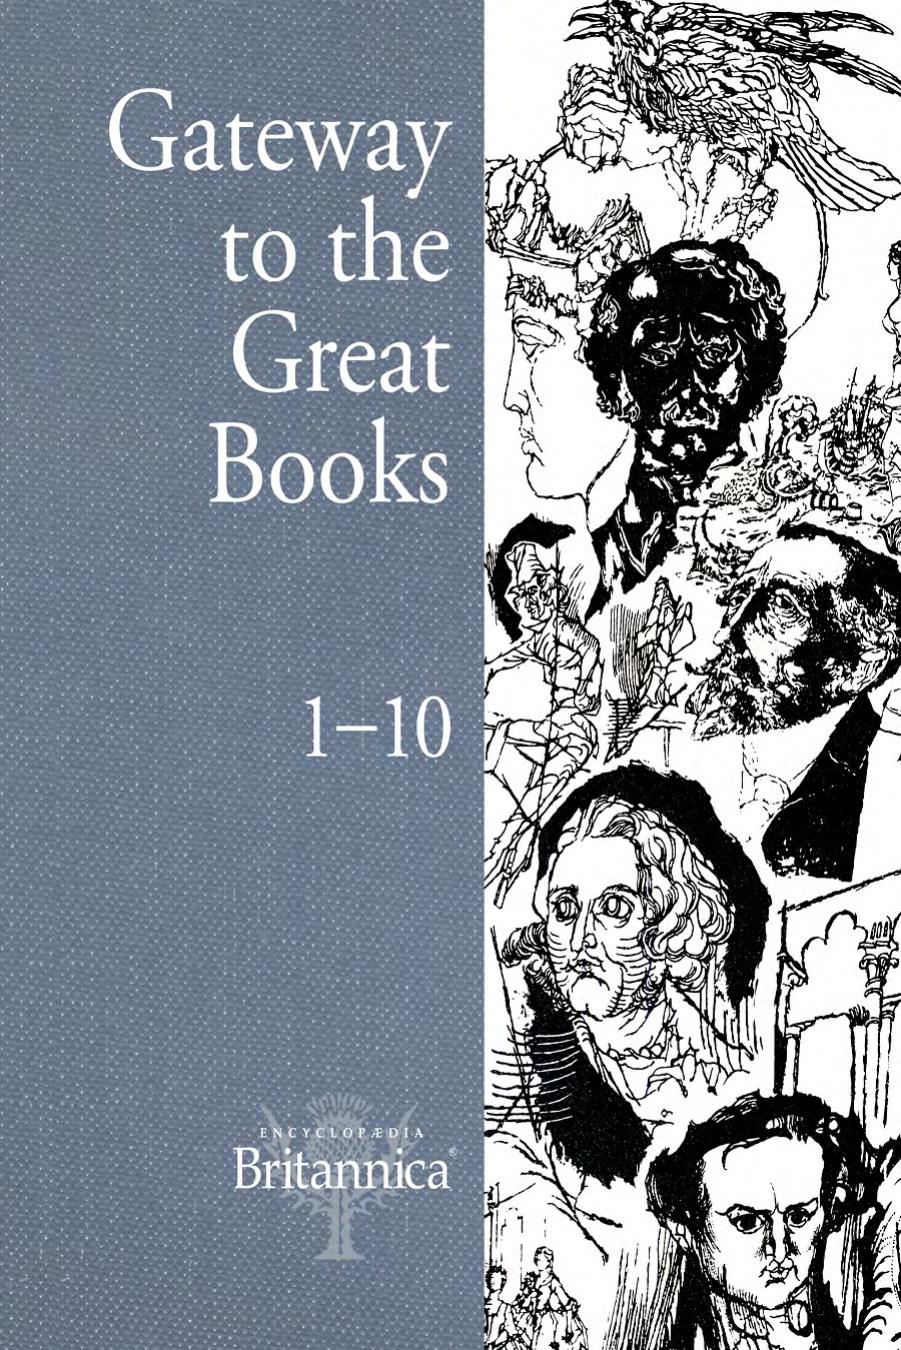 Gateway to the Great Books 1-10